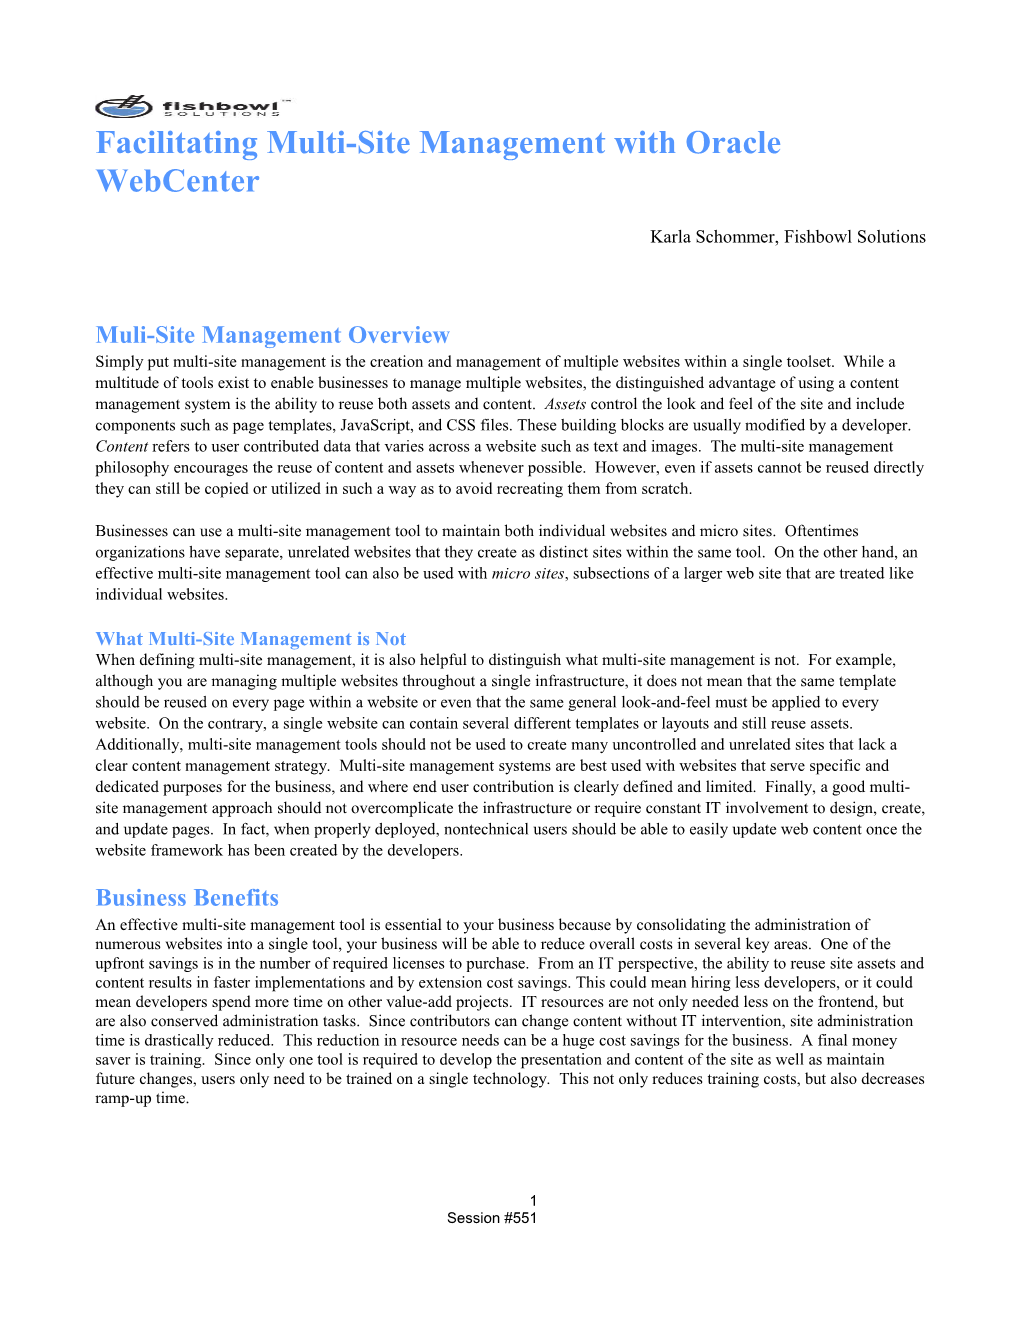 Facilitating Multi-Site Management with Oracle Webcenter